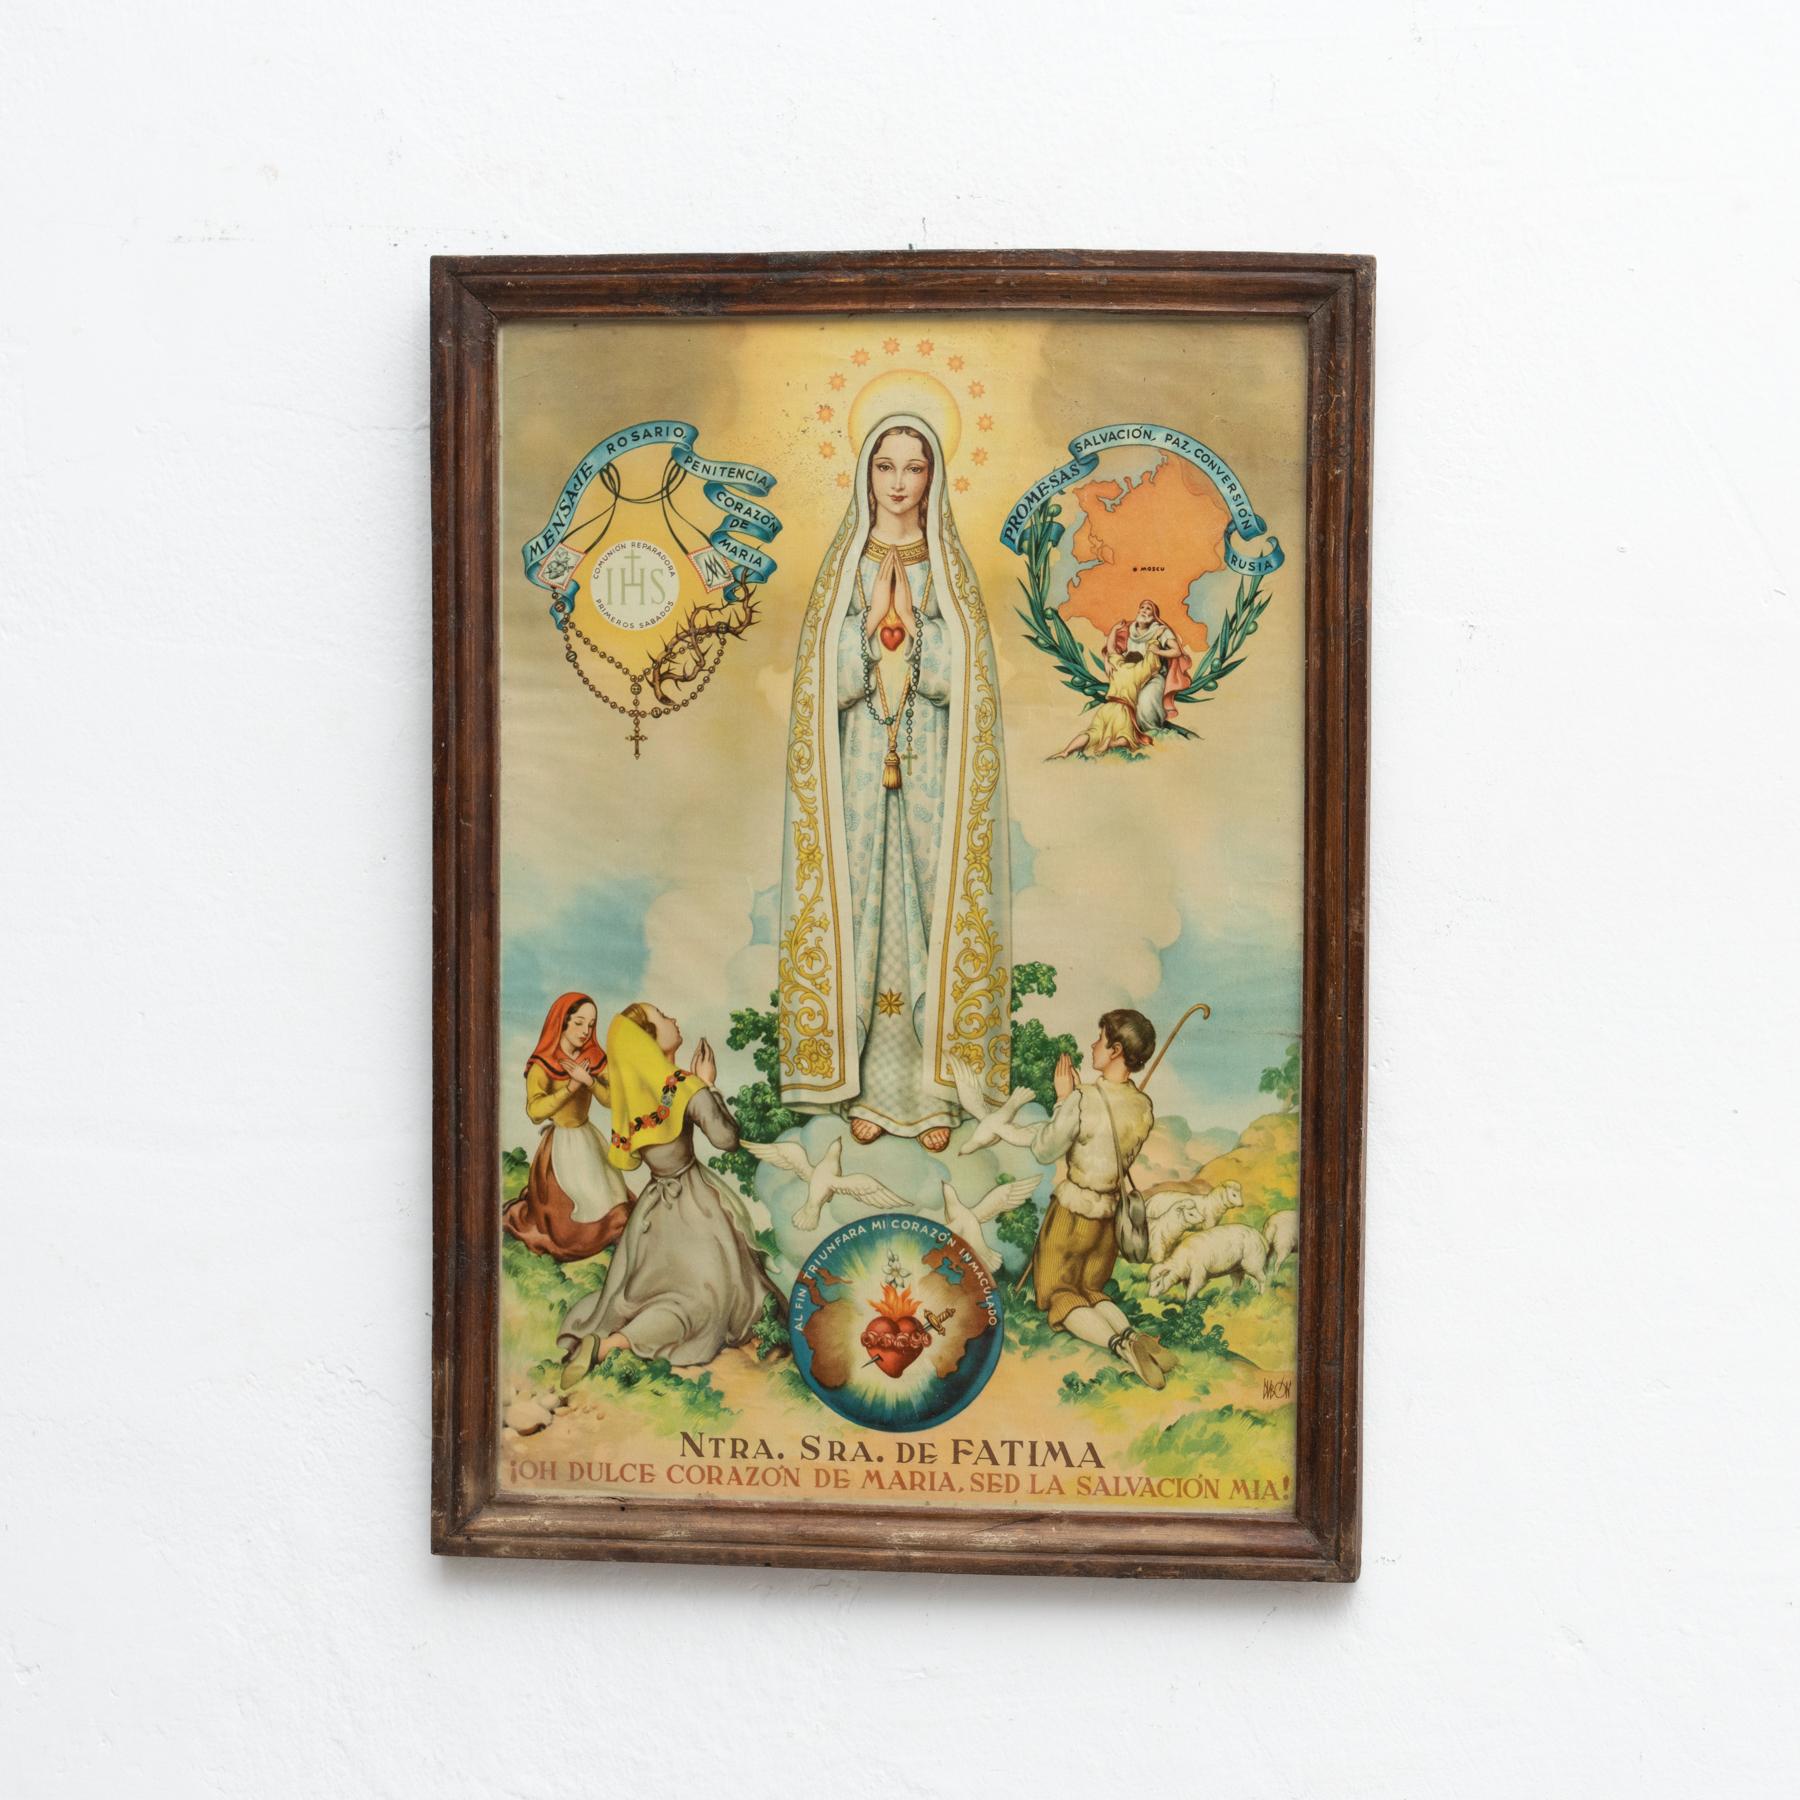 Religious artwork of virgin 'Nuestra Señora de Fátima' by unknown artist, circa 1960.

Framed.

In original condition, with minor wear consistent of age and use, preserving a beautiul patina.